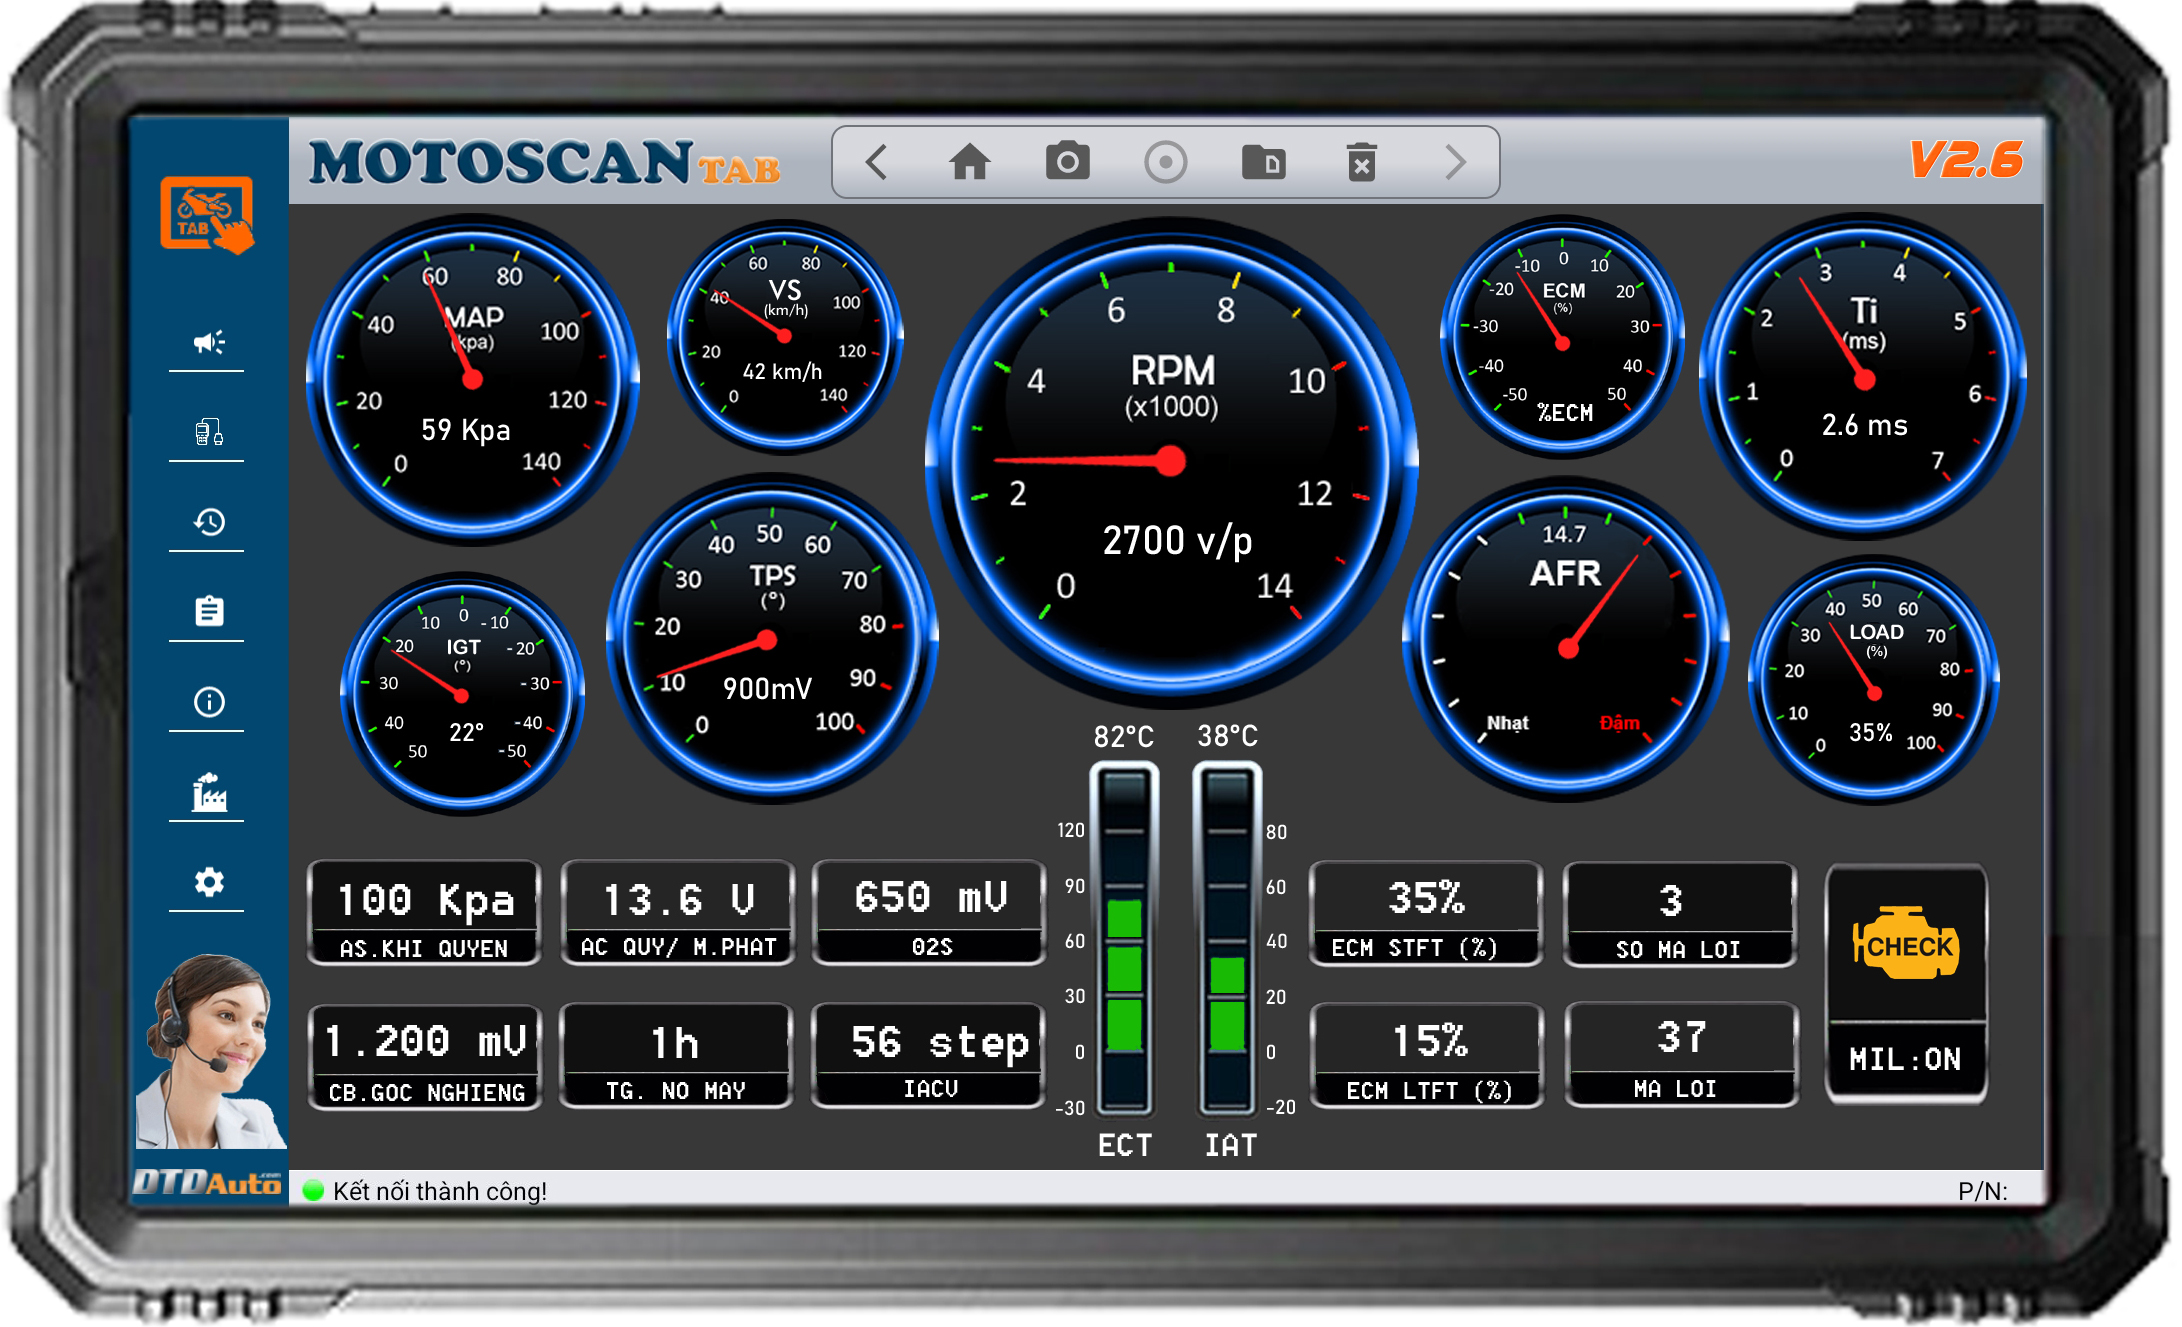 MOTOSCAN TAB - SMART DEVICE TO DIAGNOSE, REPAIR ELECTRONIC AND ELECTRICAL SYSTEMS FOR NEW GENERATION MOTORCYCLES